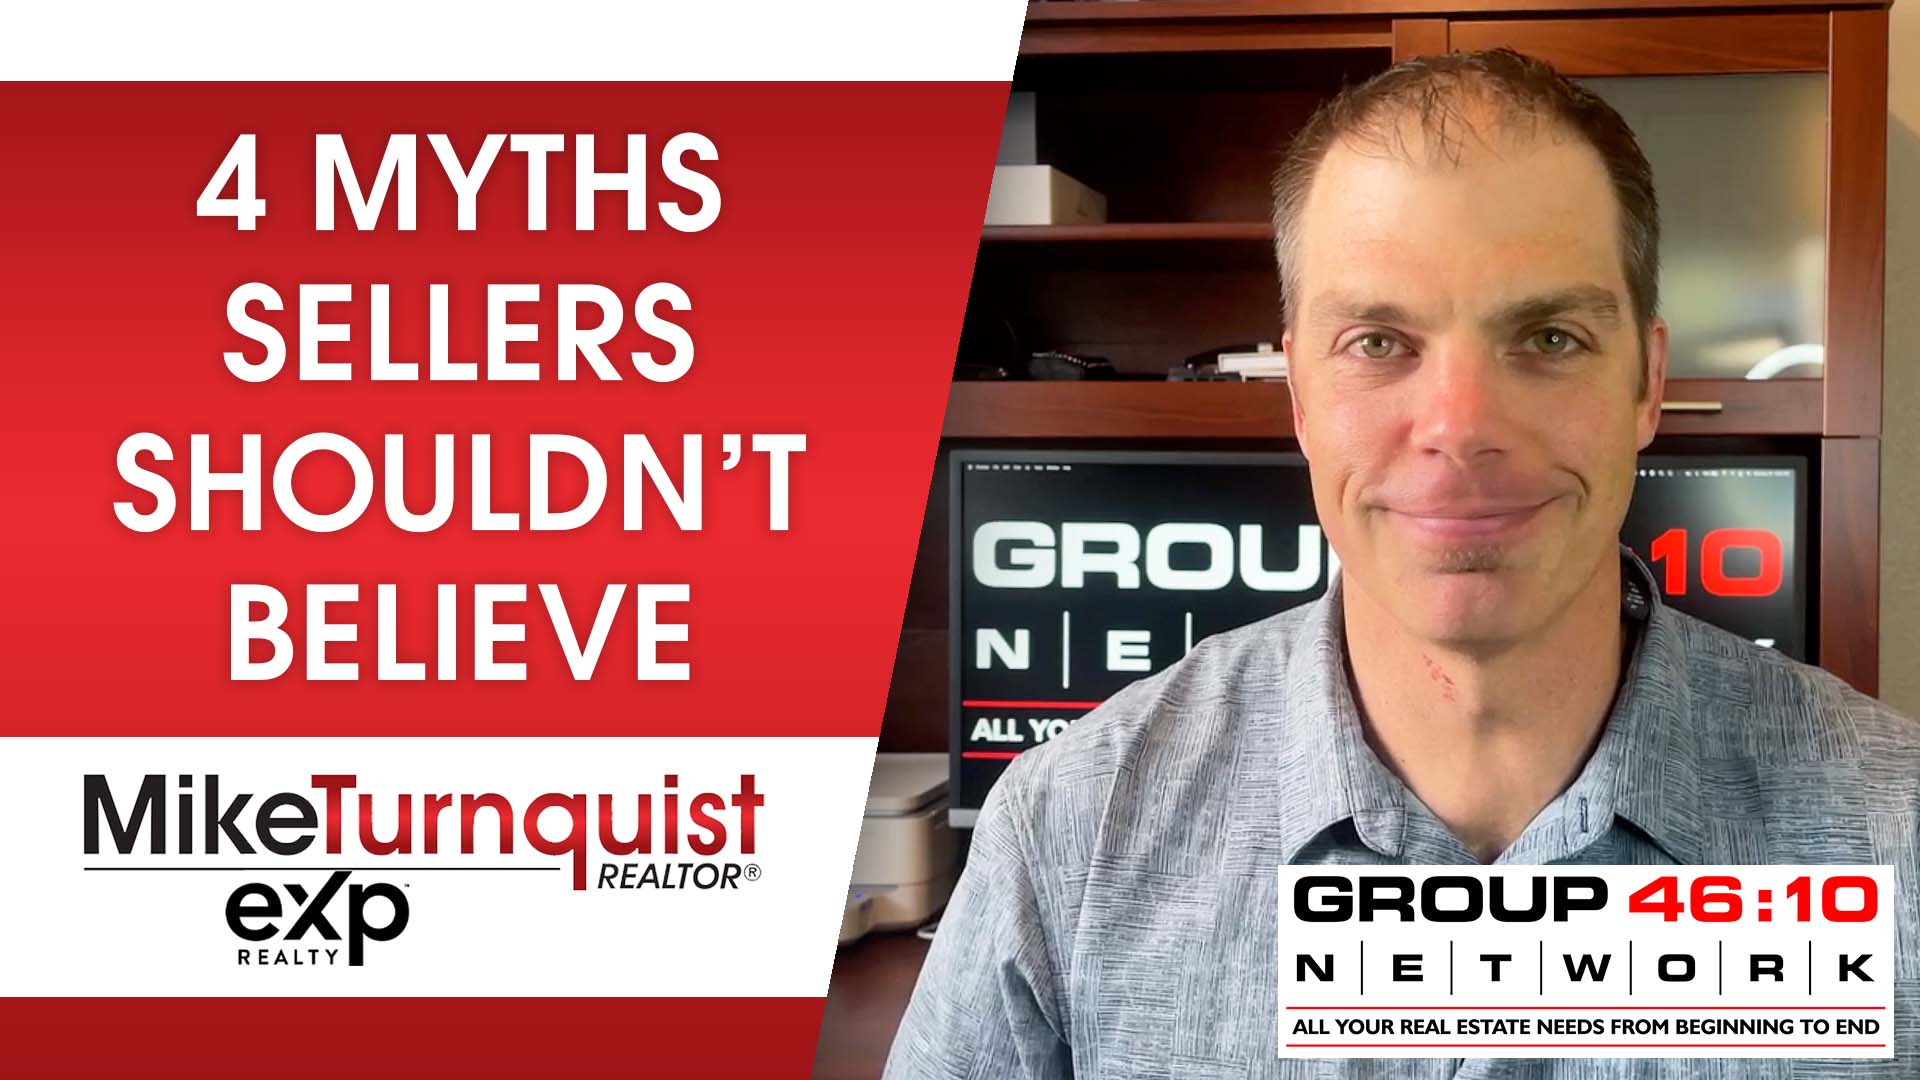 4 Myths Sellers Shouldn’t Believe